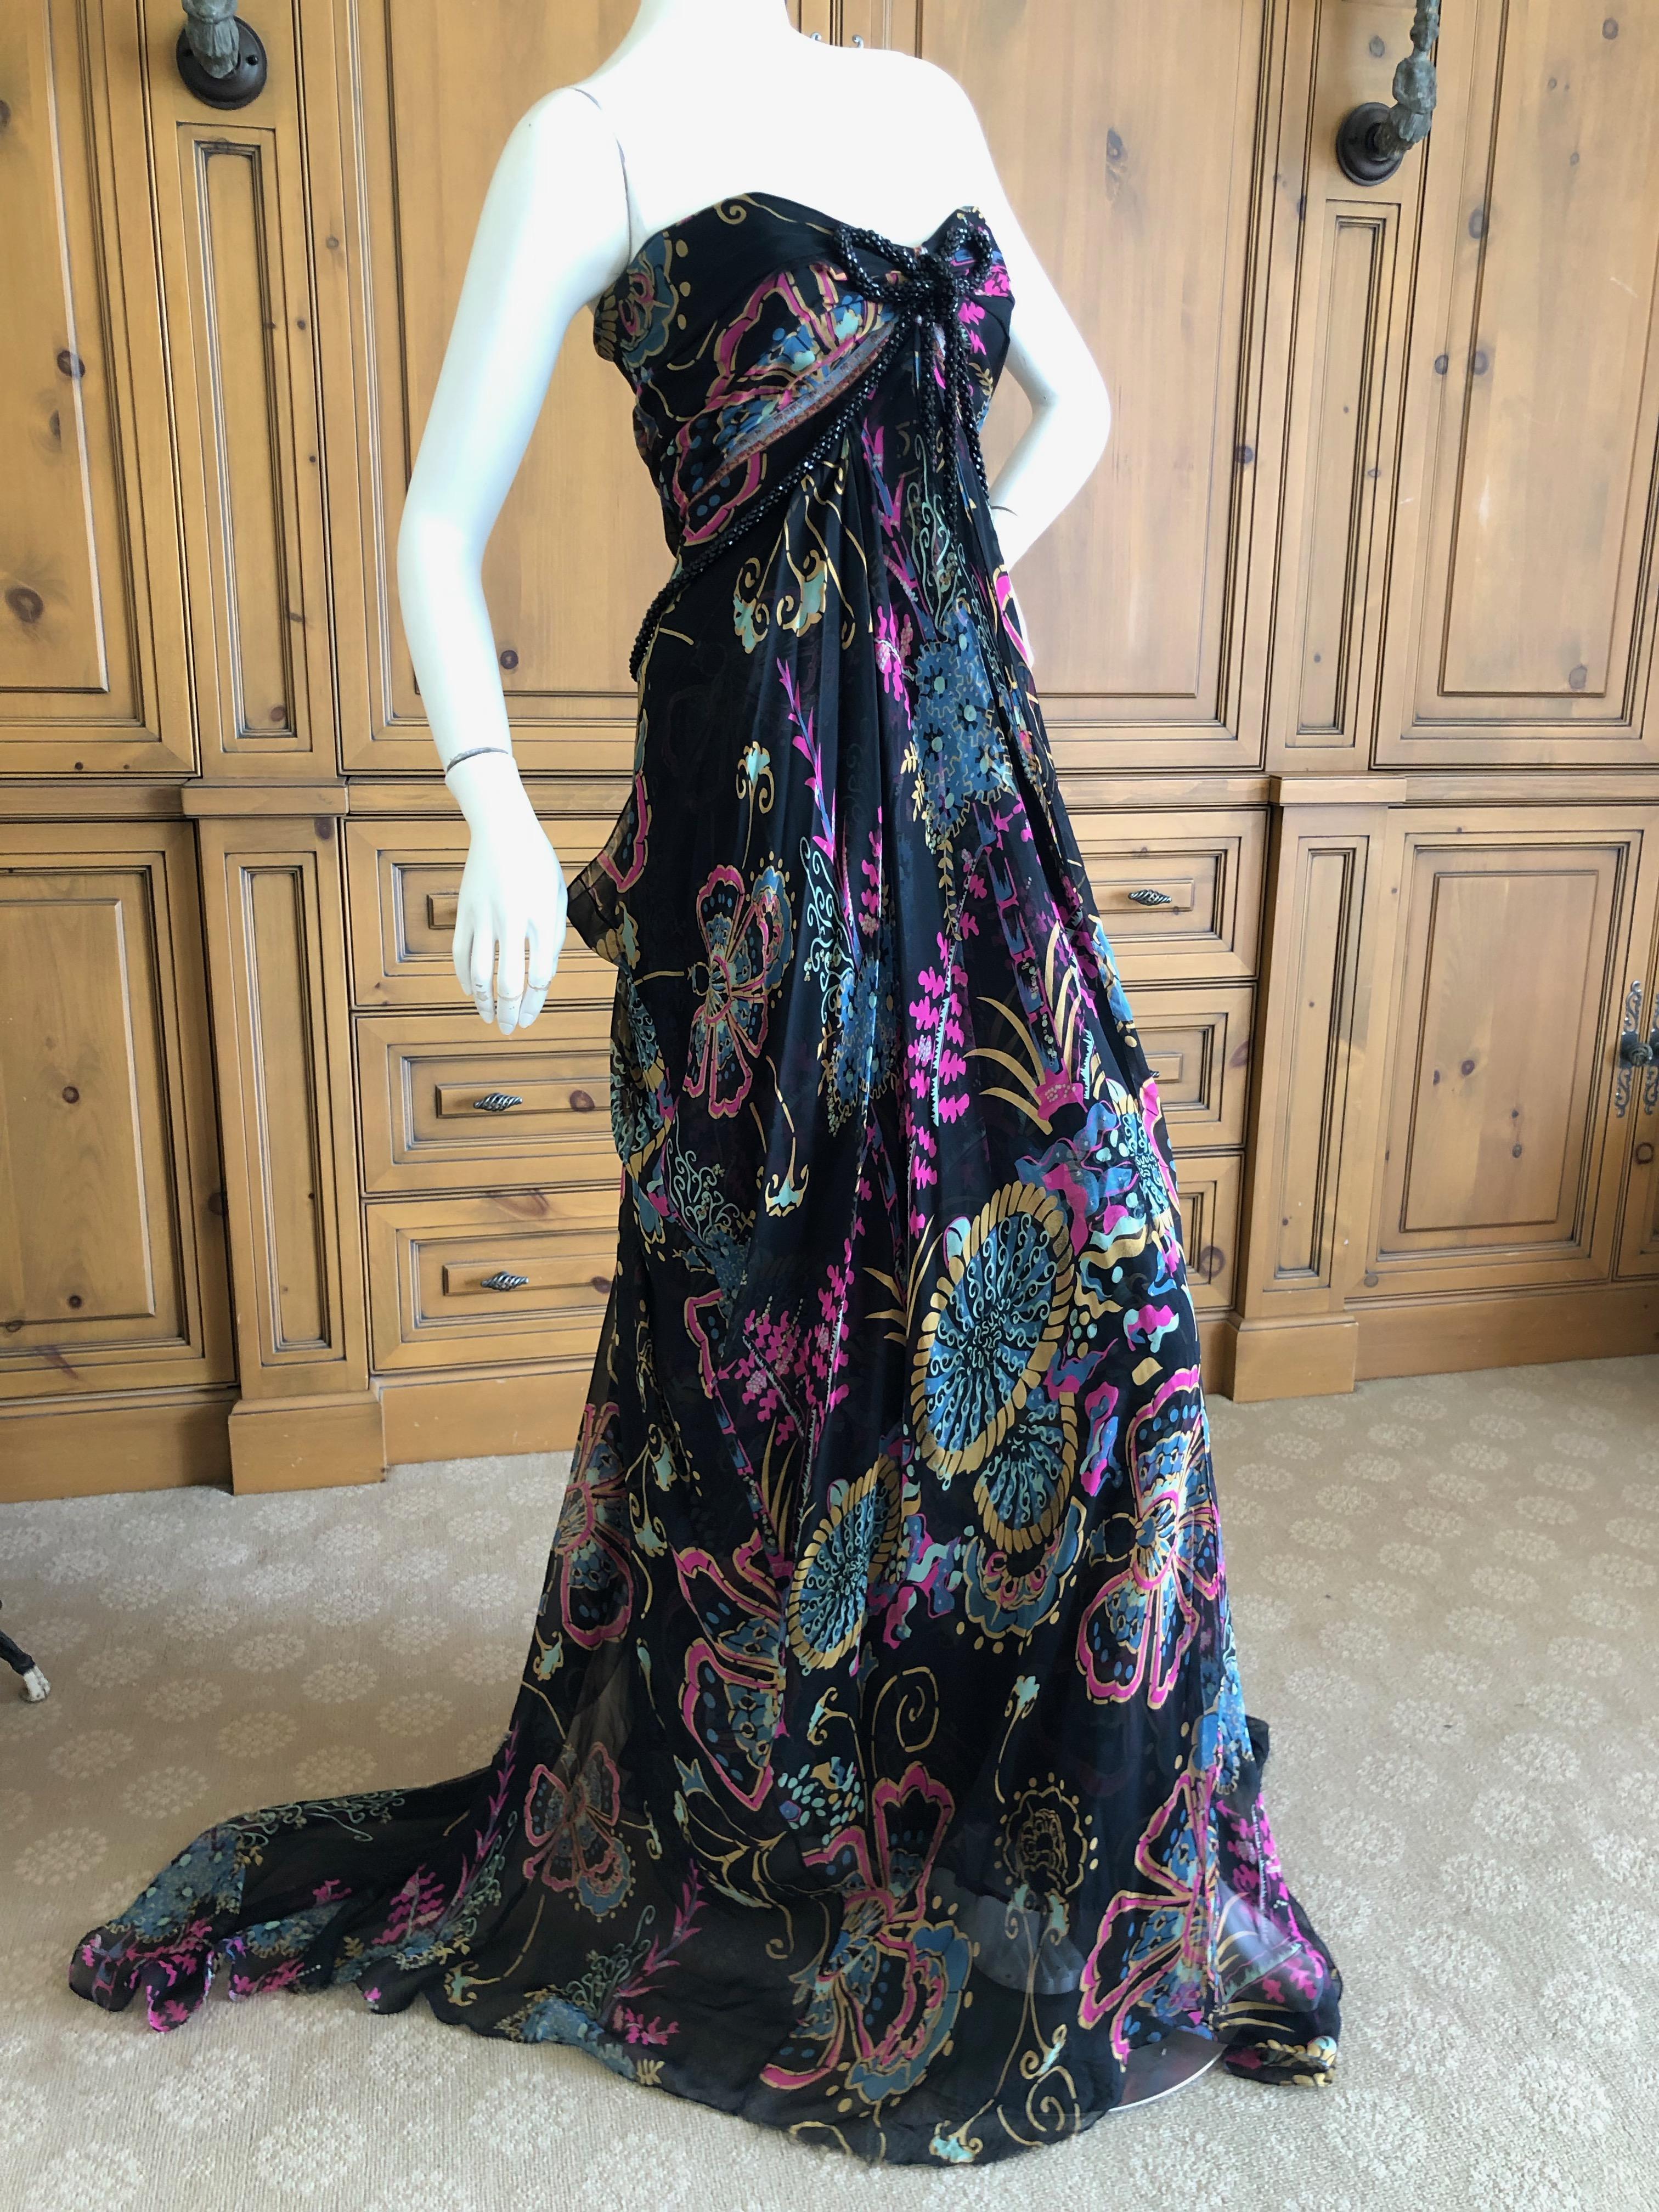 Christian Lacroix Vintage Floral Silk Evening Dress with Jet Bead Trim In Excellent Condition For Sale In Cloverdale, CA